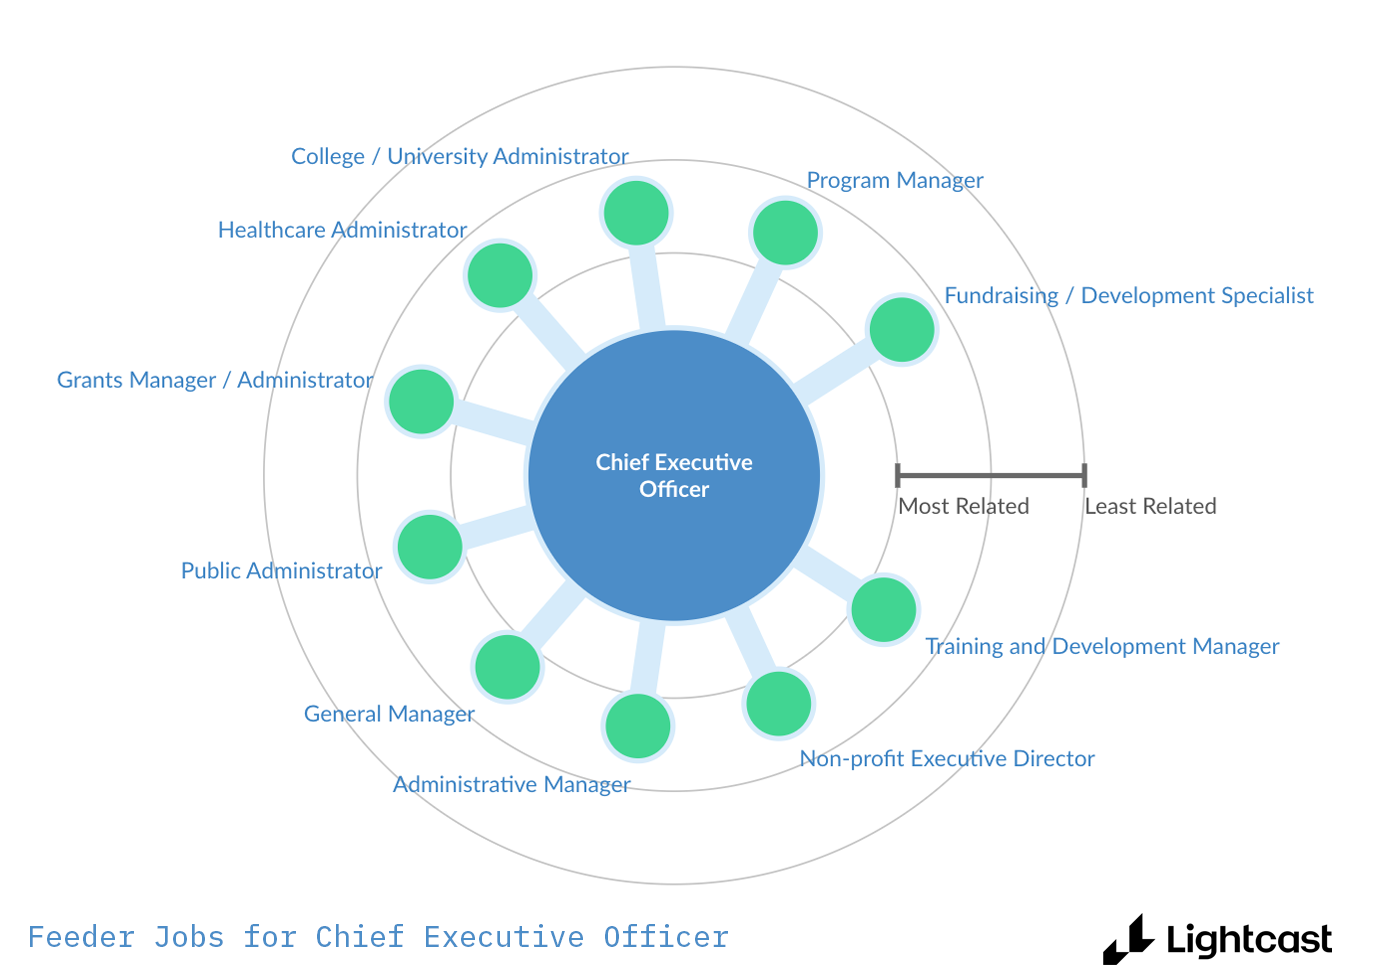 Feeder jobs for Chief Executive Officer